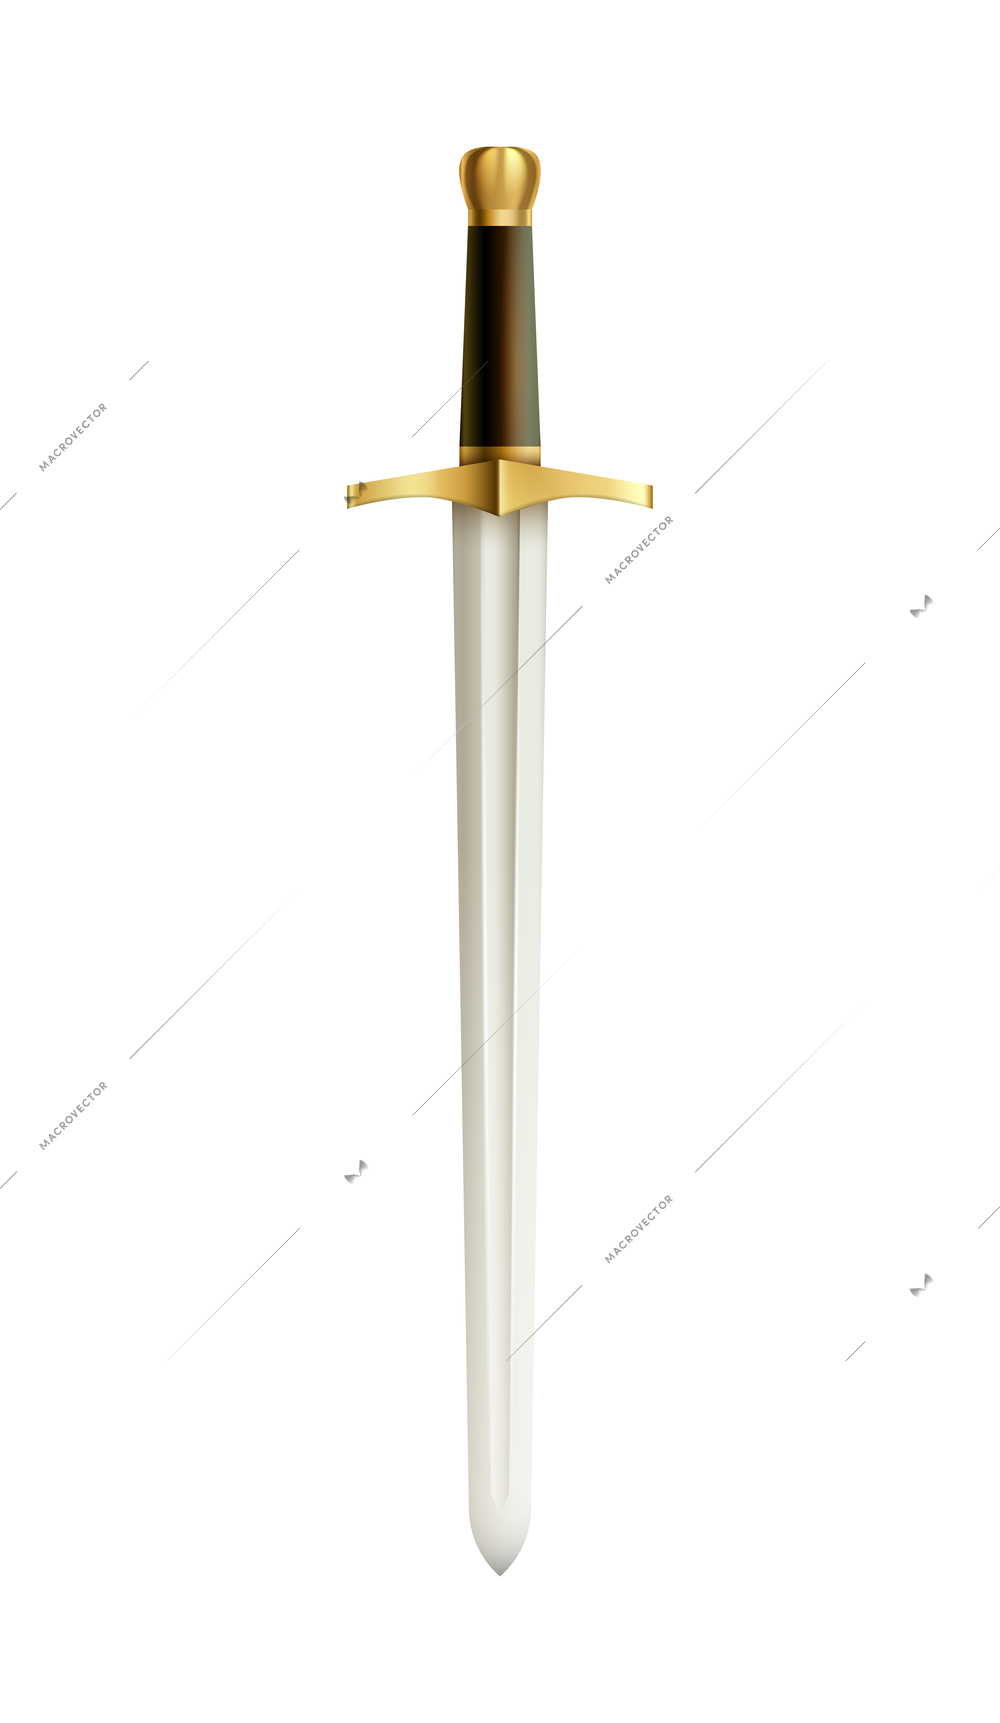 Swords composition with isolated image of medieval sword with royal handle vector illustration